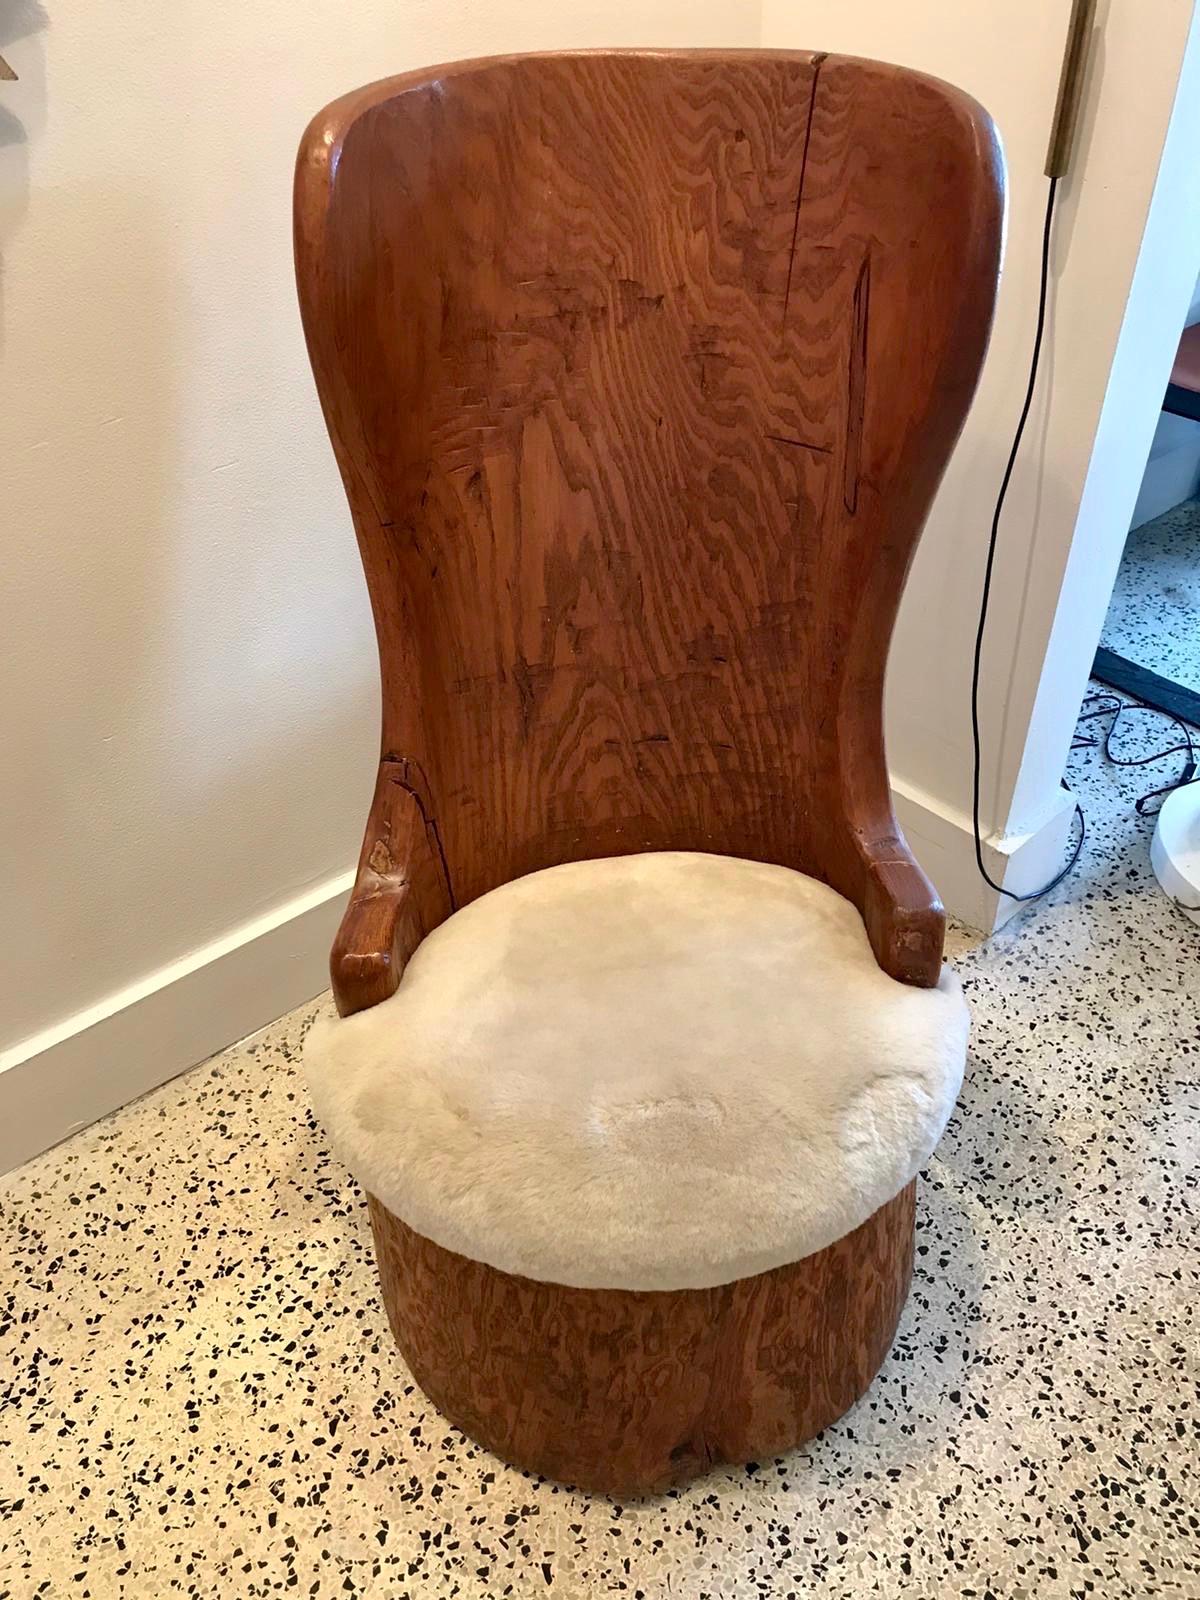 Organic Modern Unique Wood Carved Trunk Chair with Shearling Seat